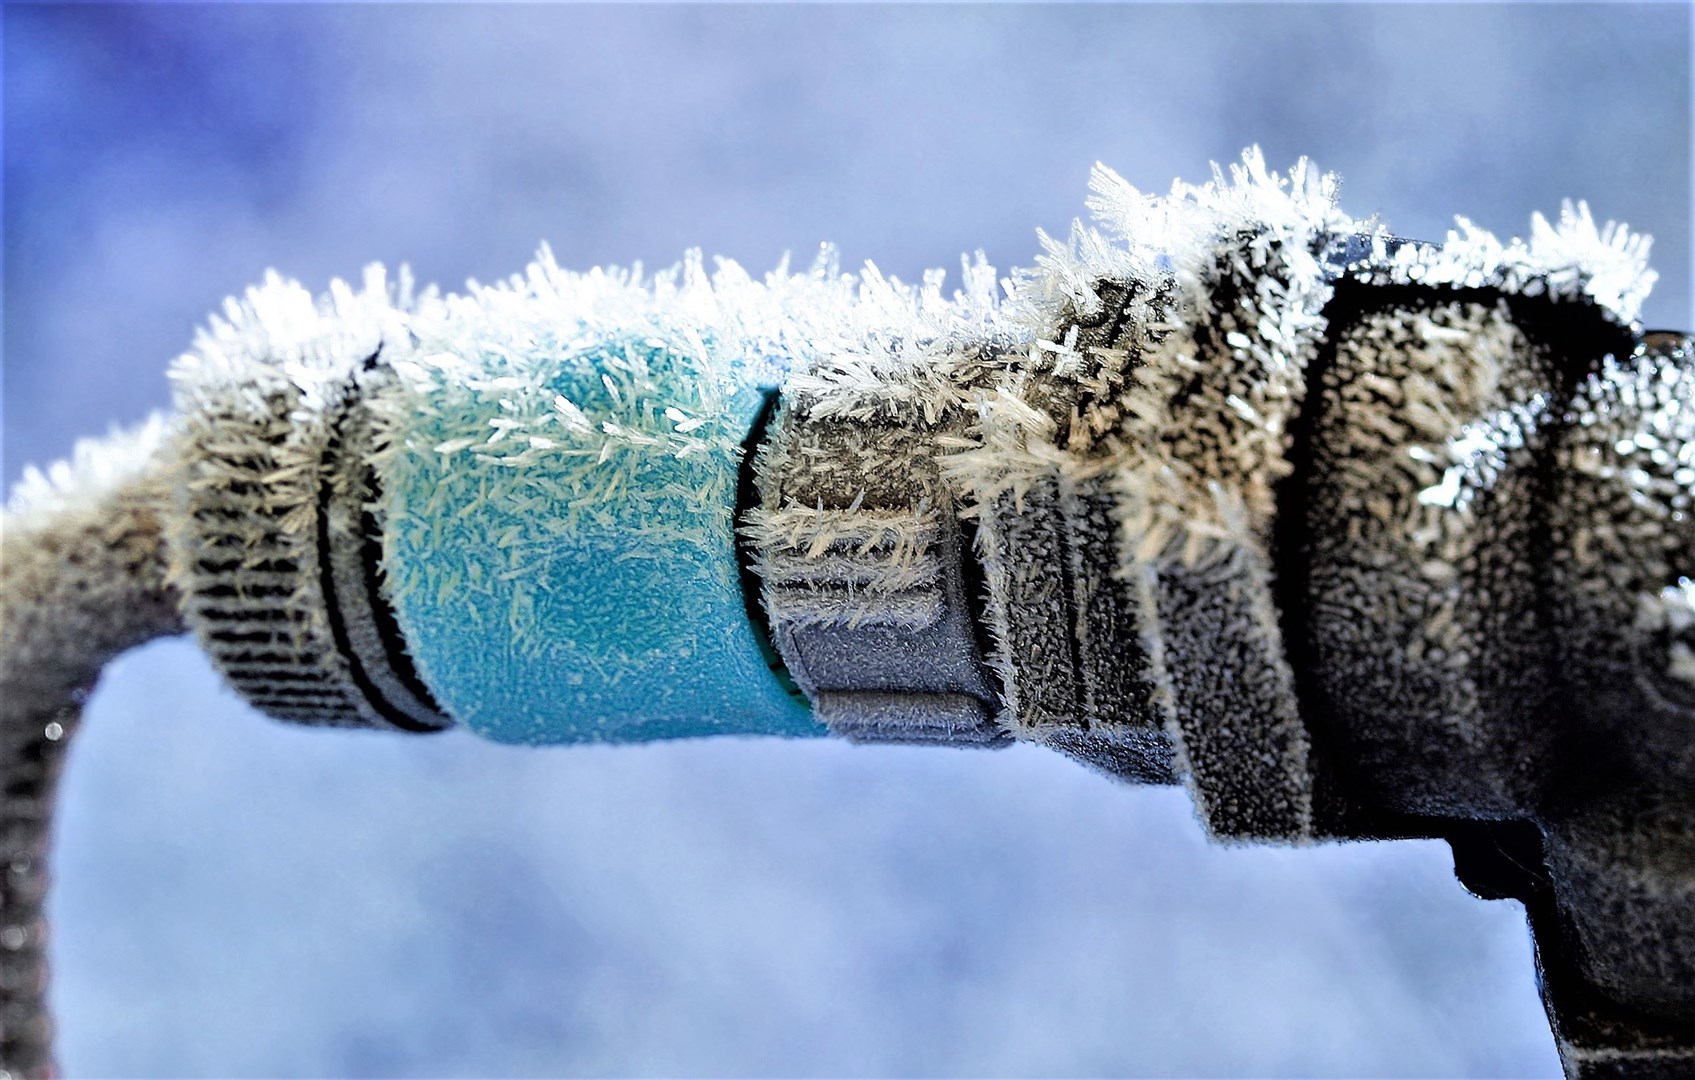 Remember to turn off outside taps is just one bit of advice to avoid issues with your water pipes this winter.